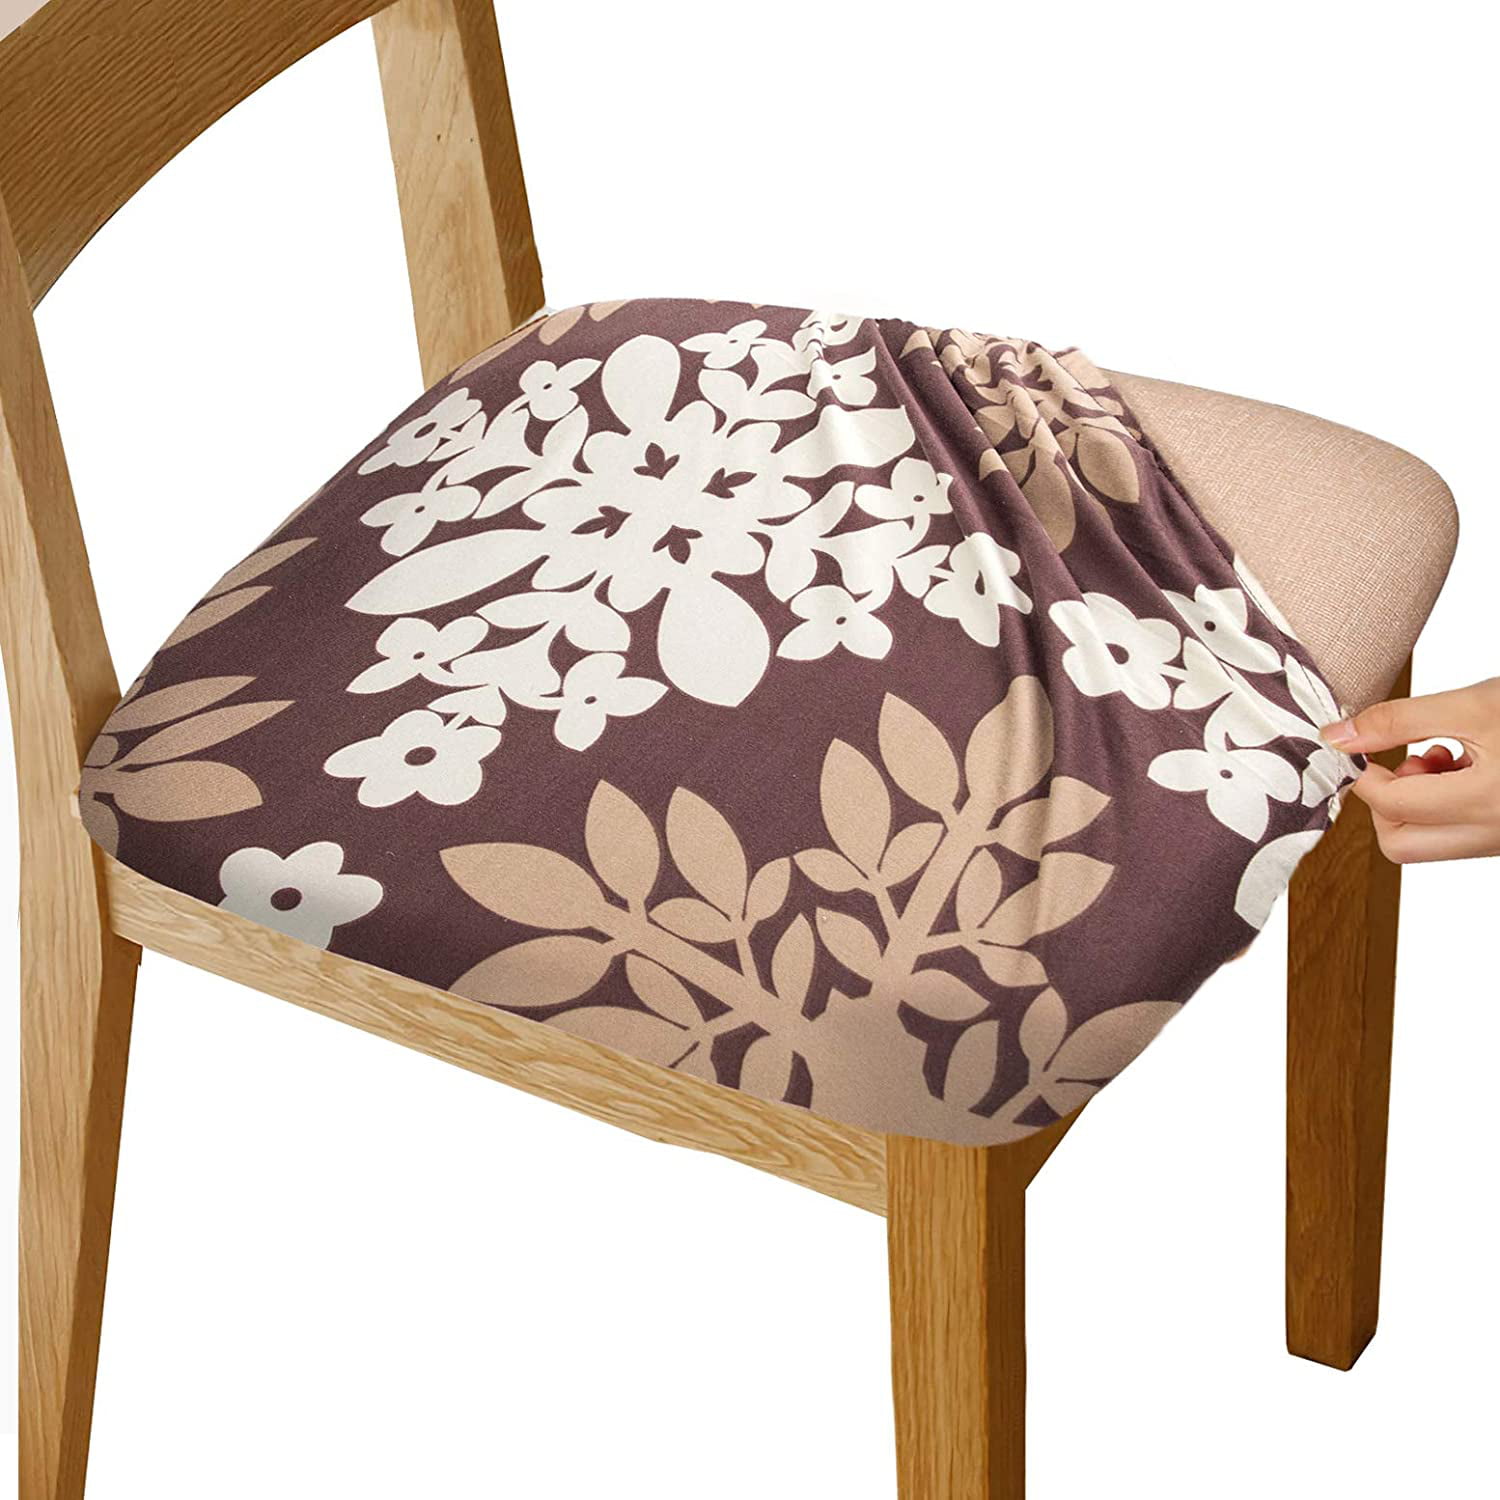 Kitchen Stretch Printed Dining Room Chair Seat Covers Removable Washable Spandex Anti-Dust Upholstered Chair Seat Cushion Slipcovers for Dining Room Office 